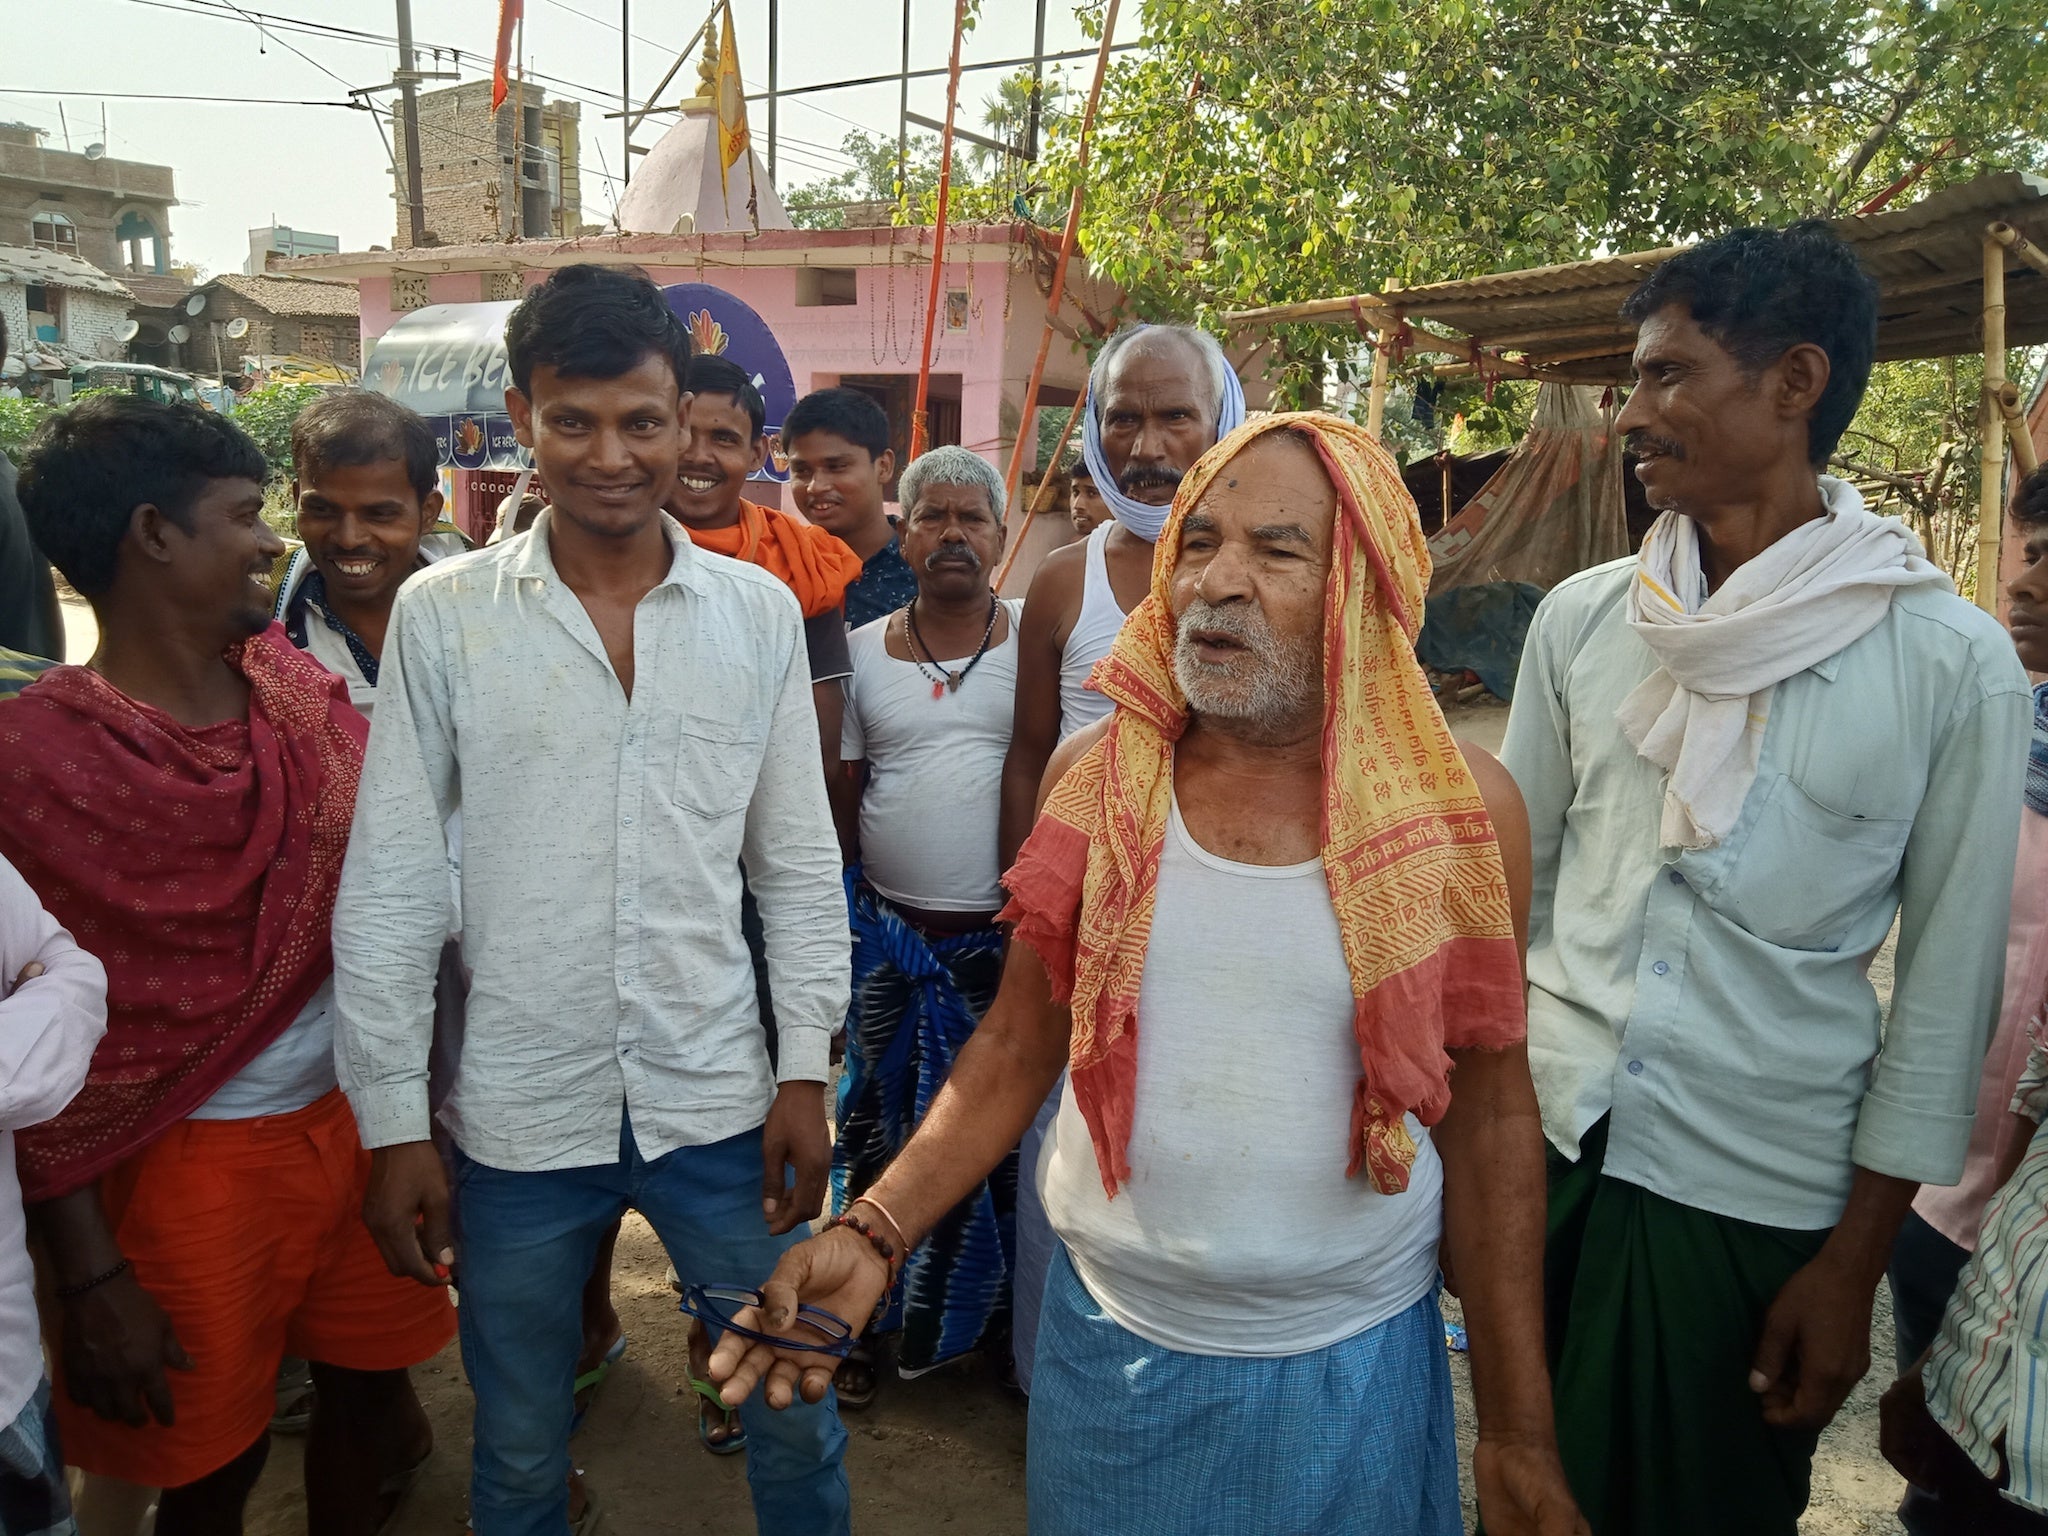 ‘Under Modi, we have taken the fight to Pakistan’: From traders to daily wage labourers (seen here), BJP support is strong among Patna city residents